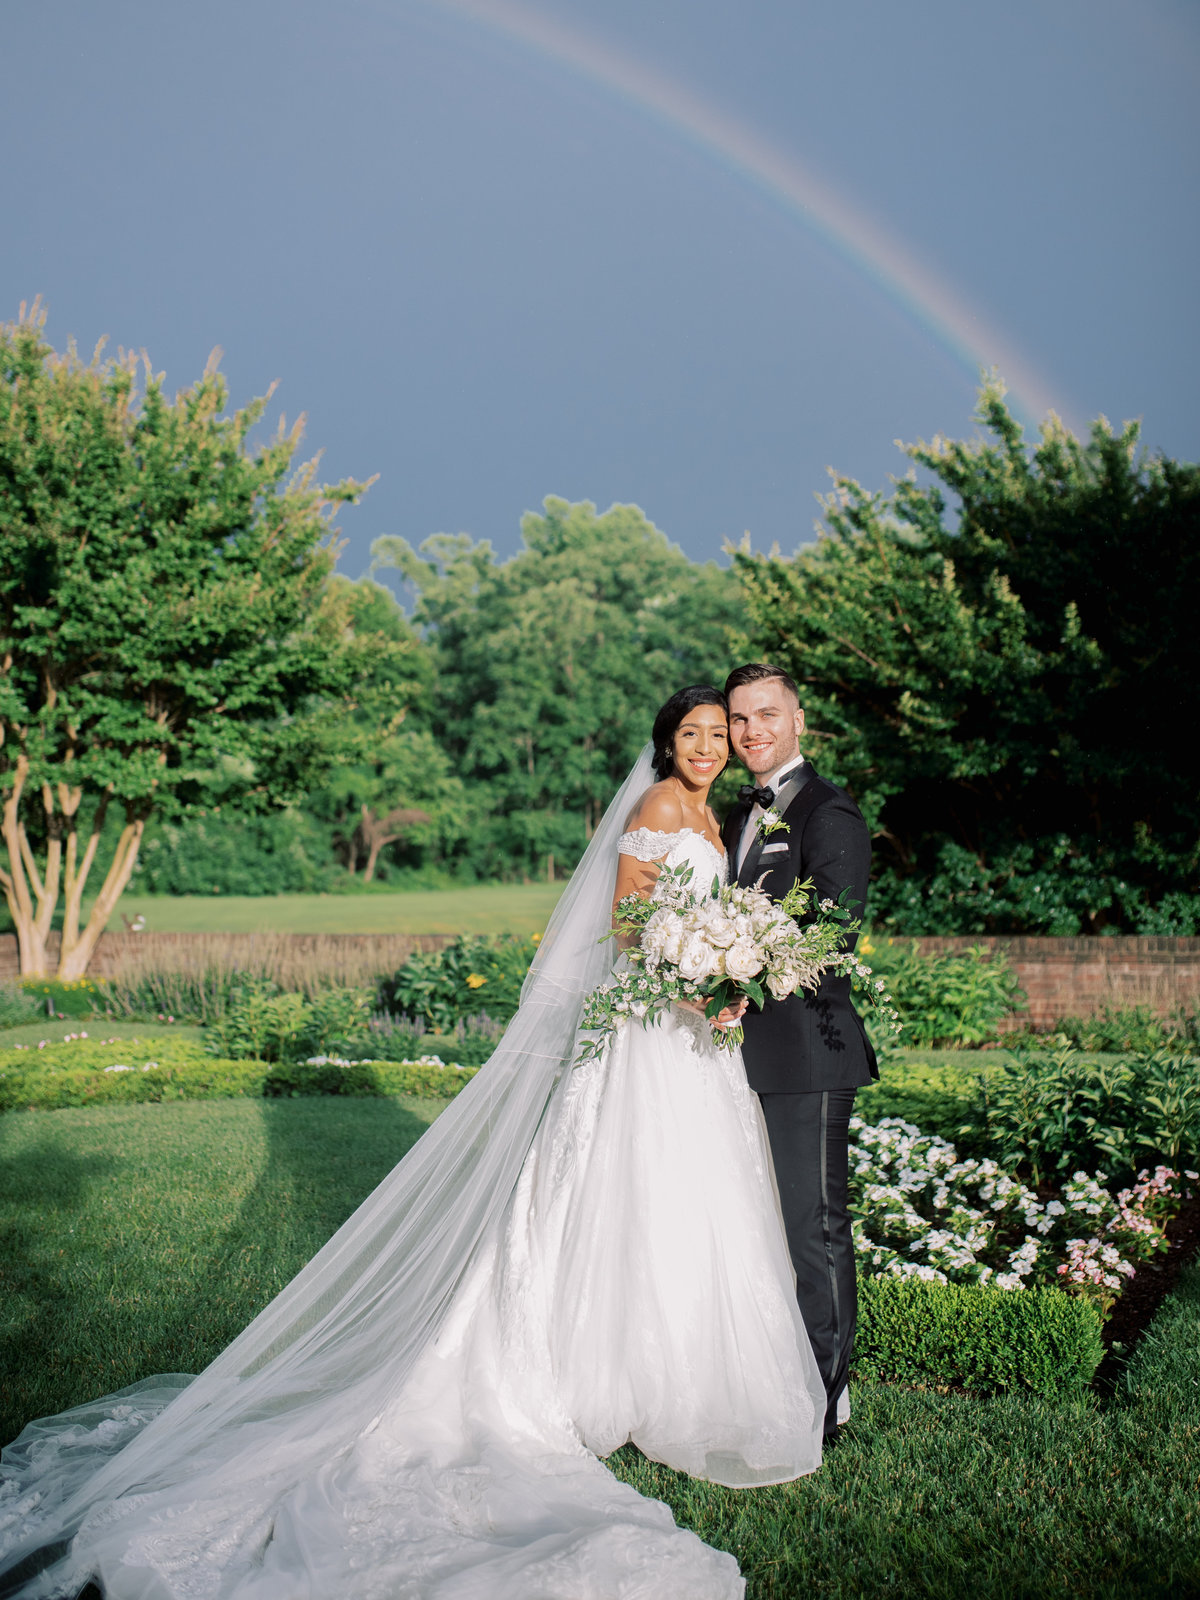 Bride and groom in front of a rainbow at Oxon Hill Manor, Maryland